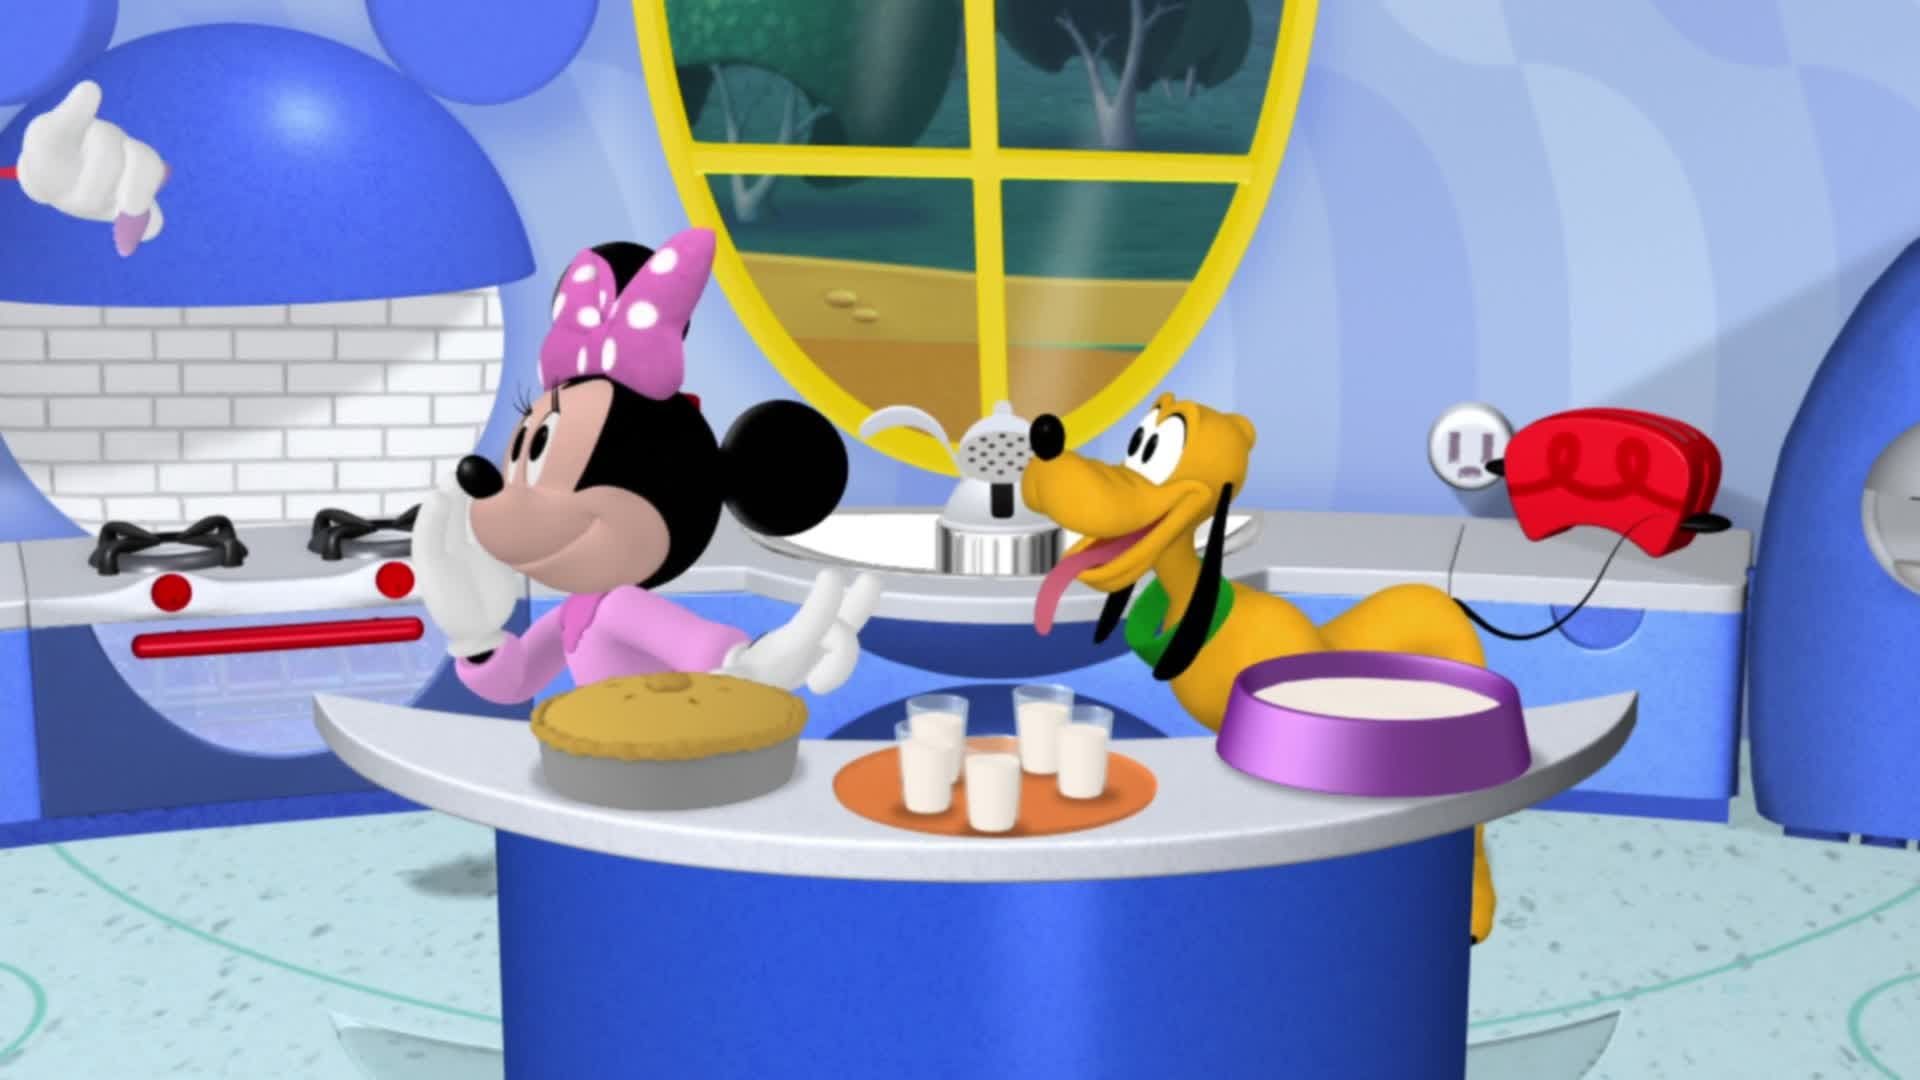 Watch Mickey Mouse Clubhouse season 1 episode 9 streaming online